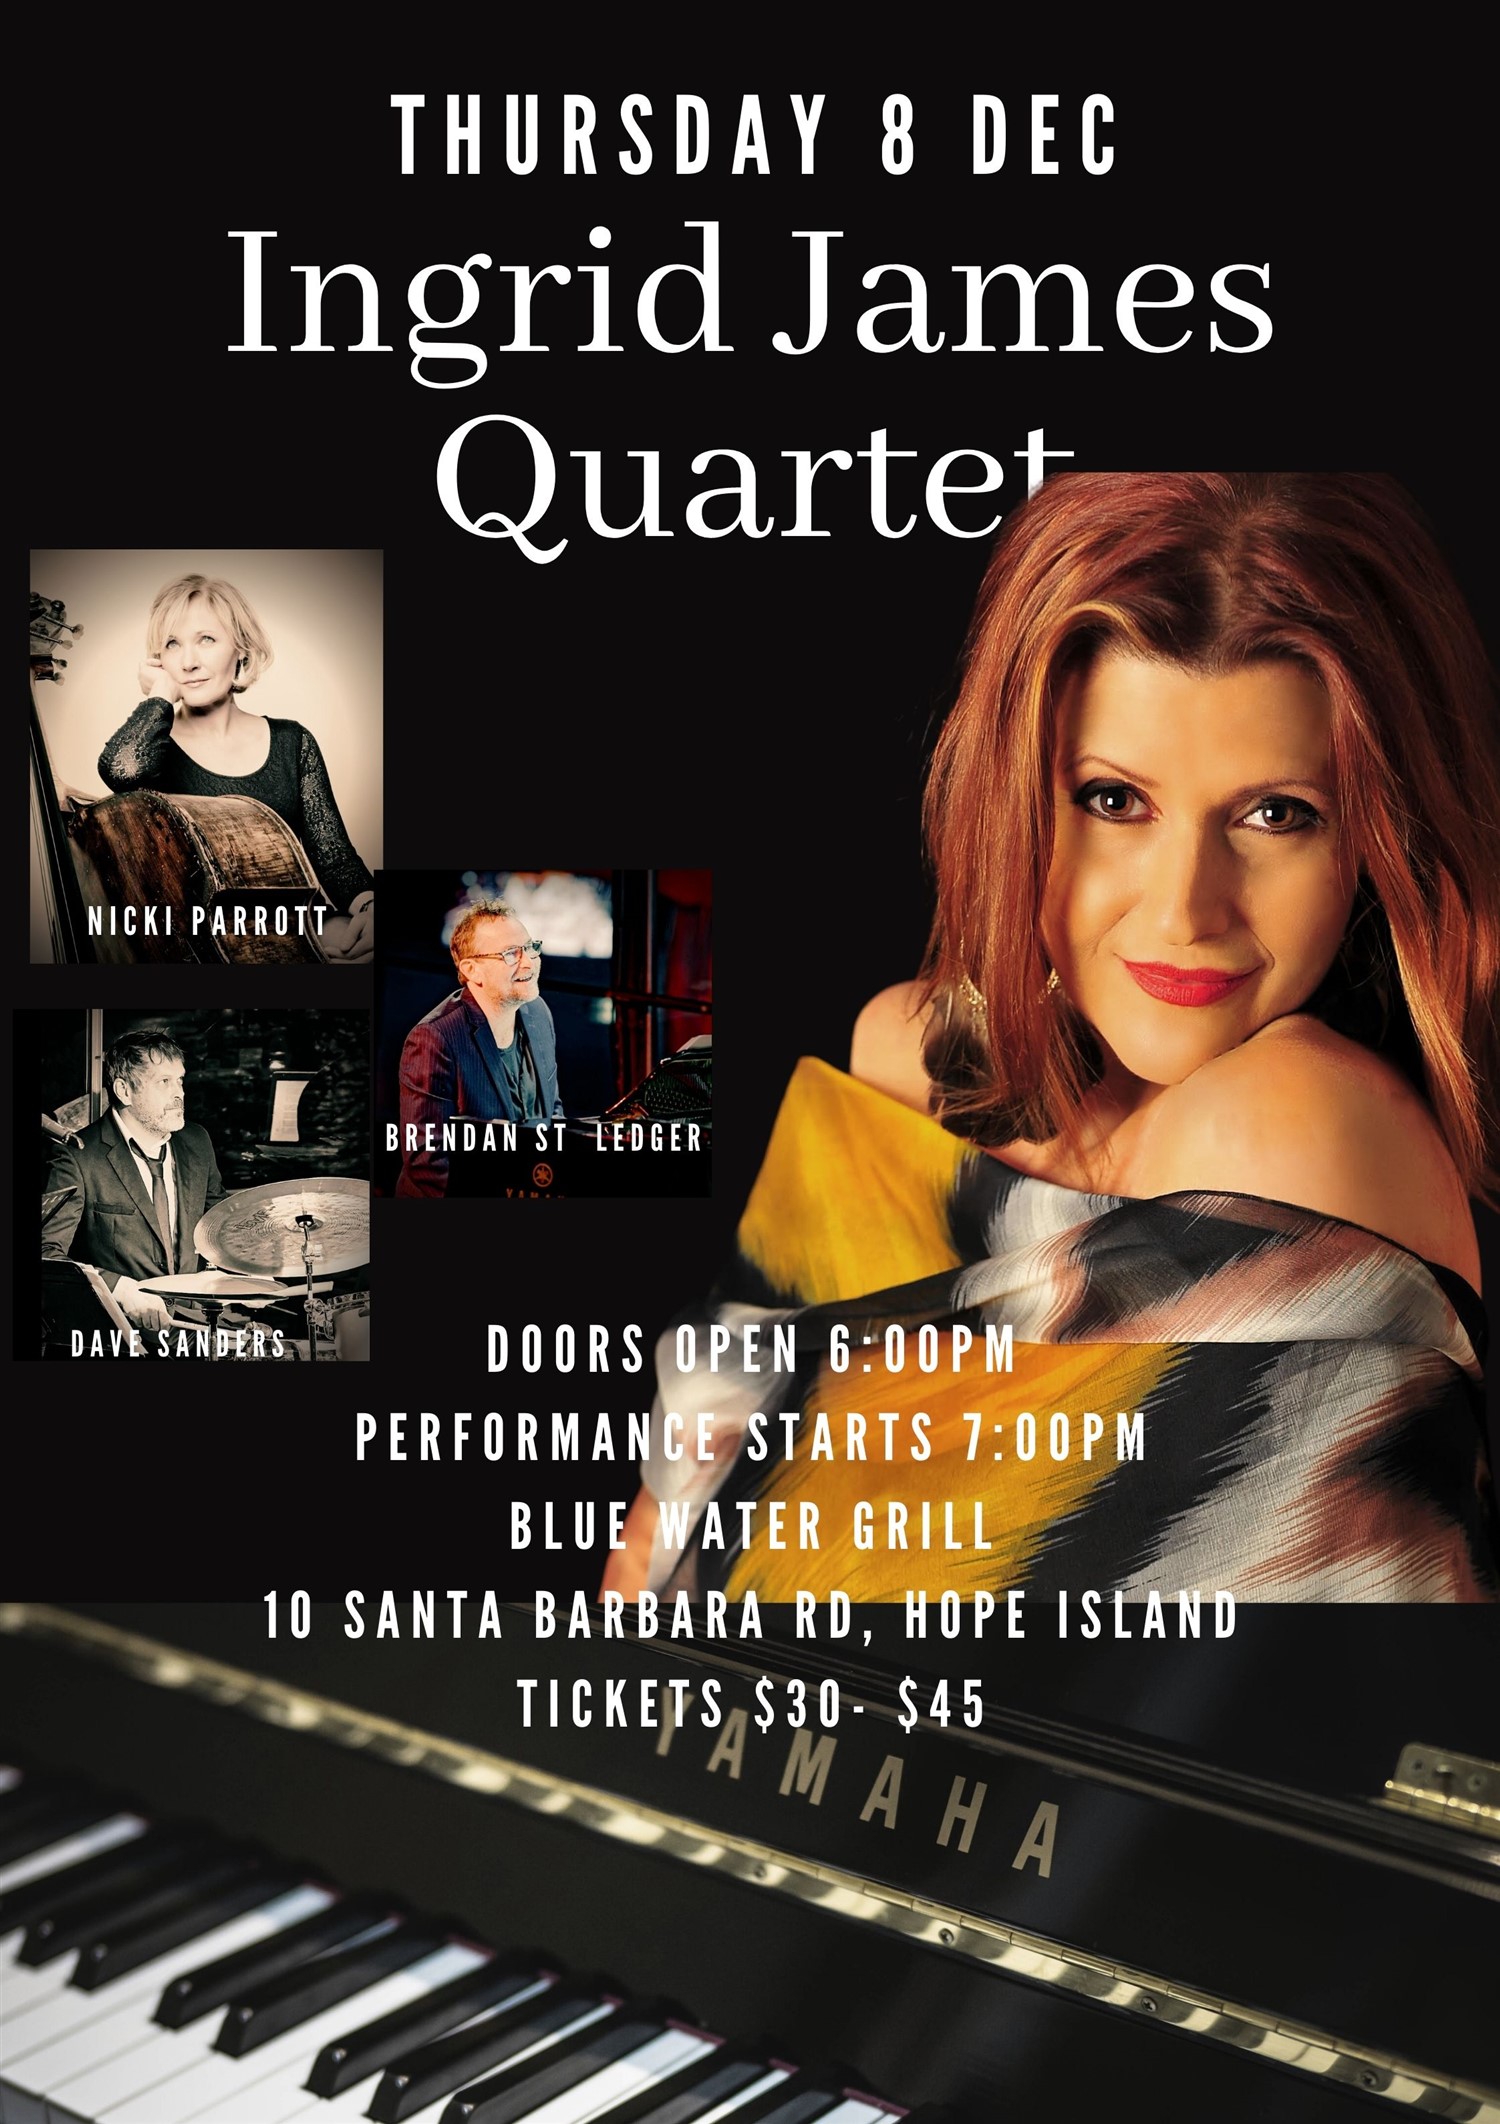 Ingrid James Quartet  on Dec 08, 18:00@Hope Island Jazz - Blue Water Grill - Buy tickets and Get information on  